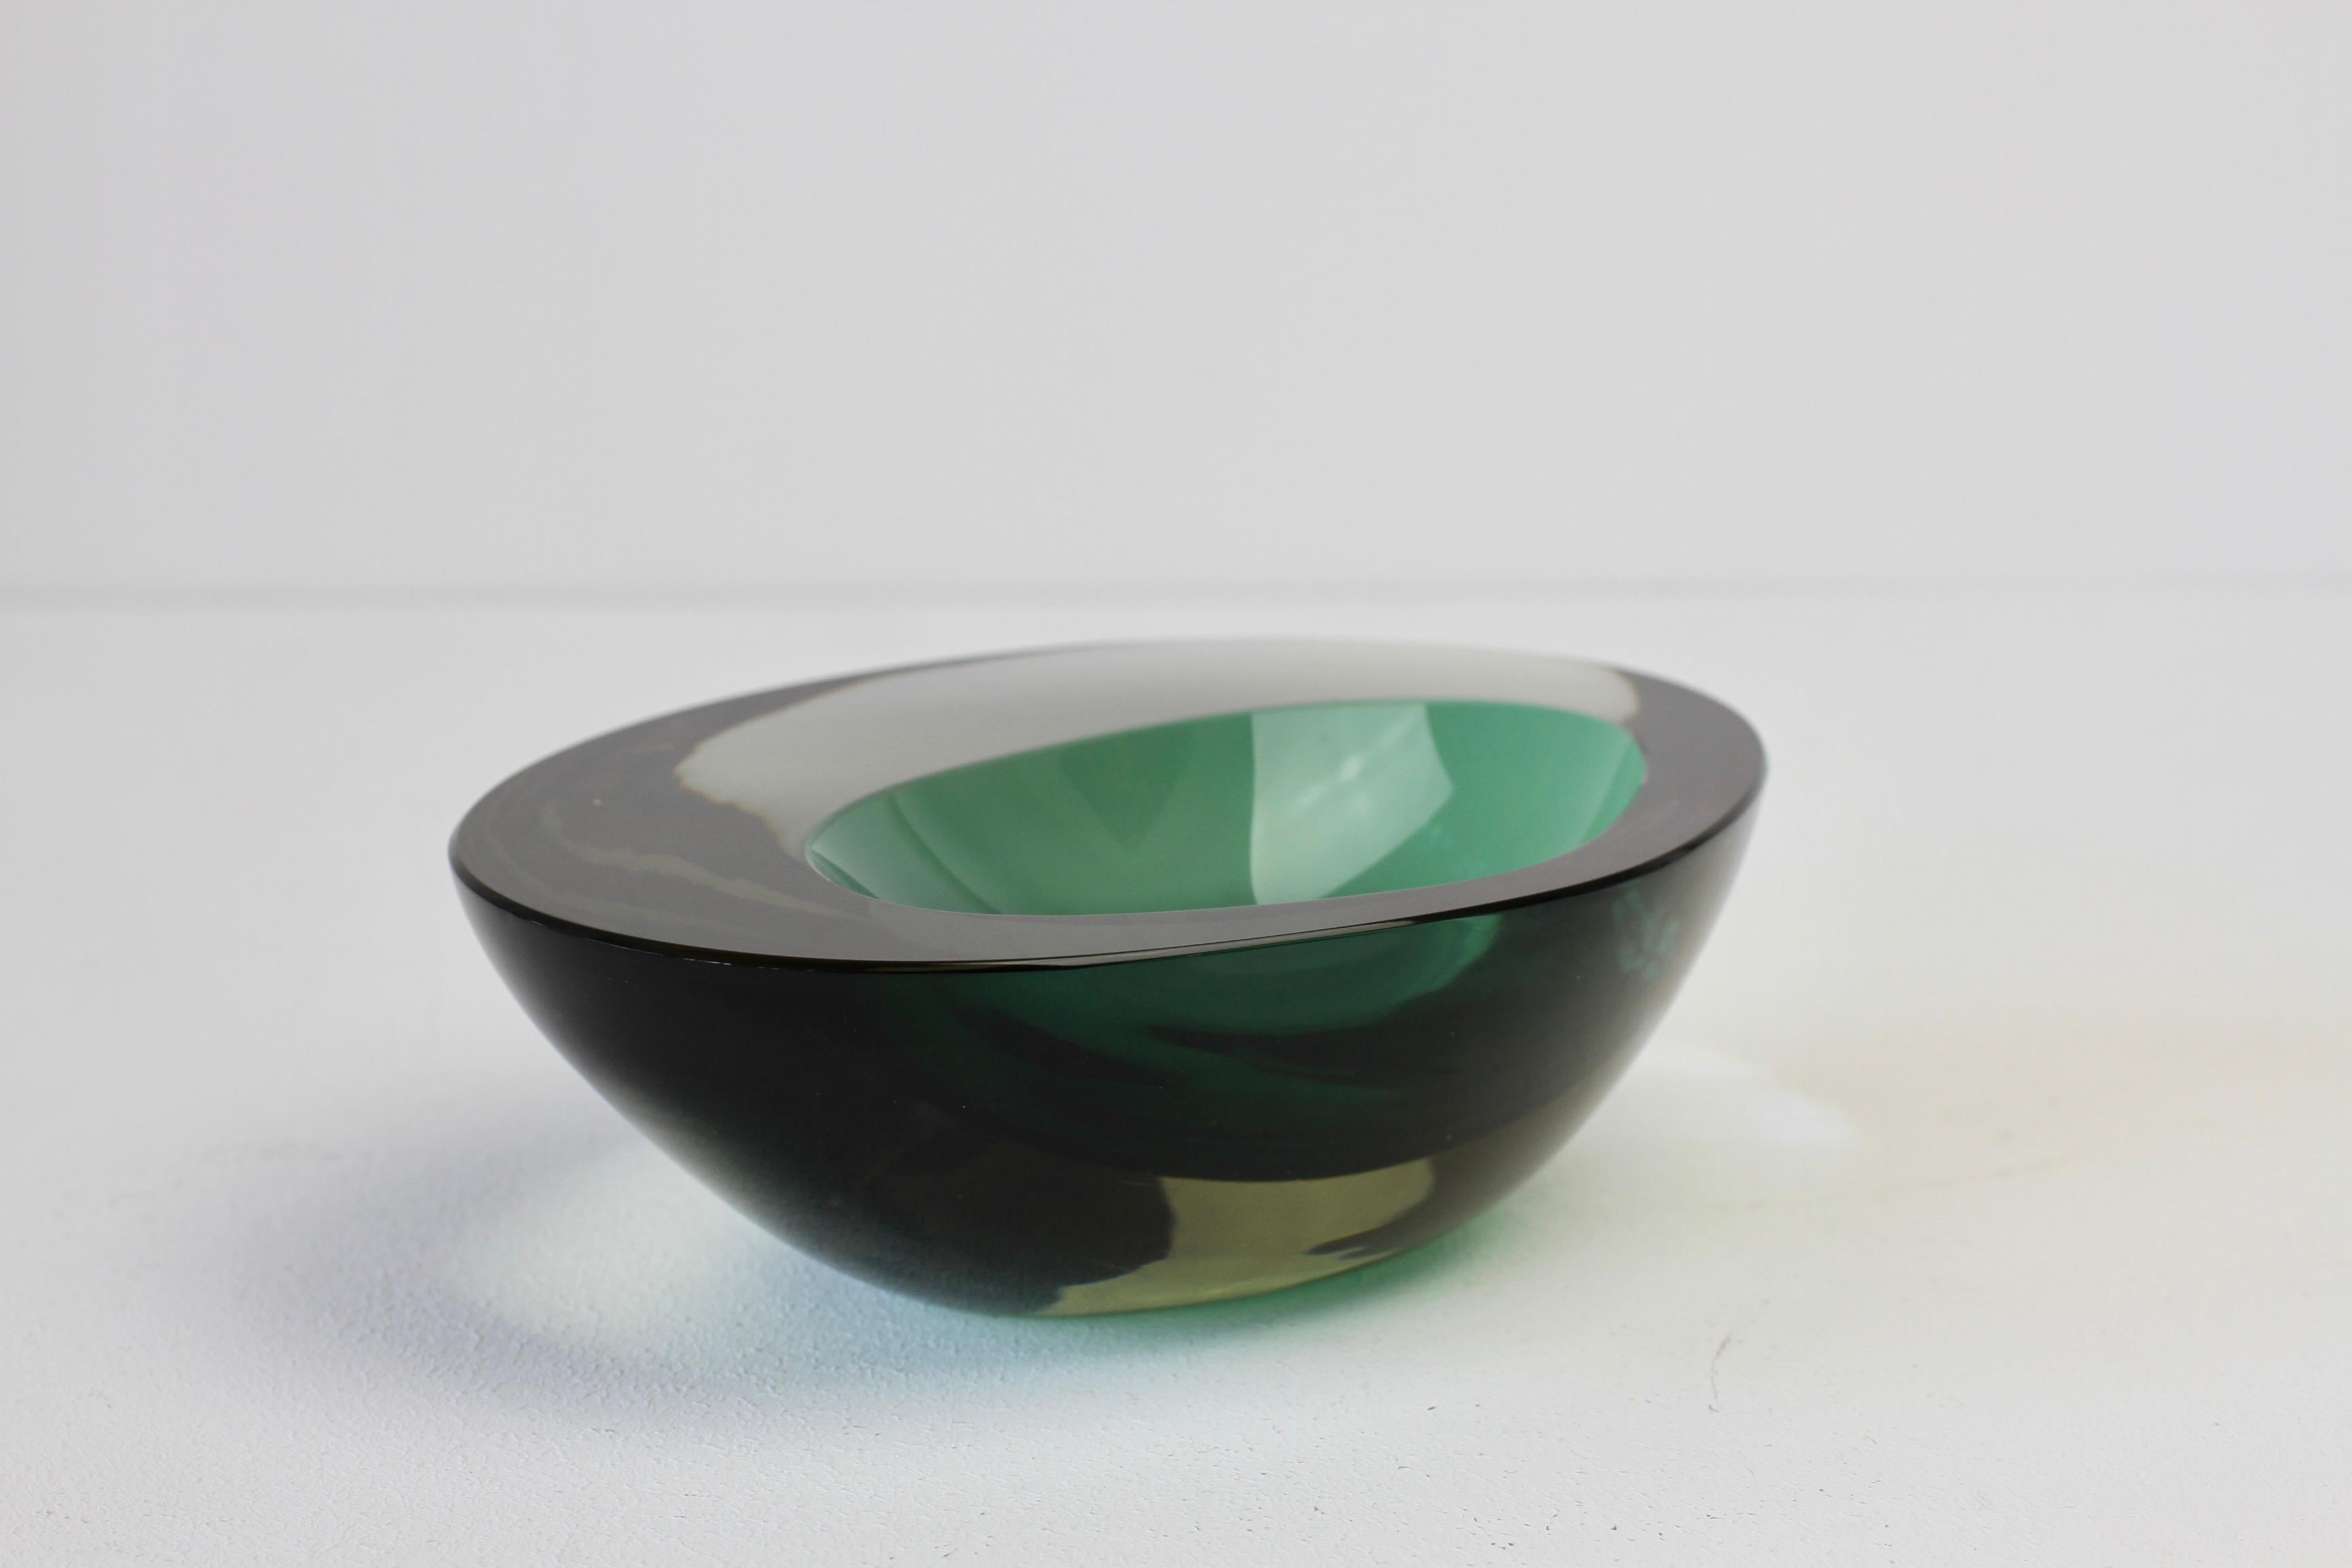 Large Cenedese Italian Asymmetric Green Sommerso Murano Glass Bowl Dish, Ashtray For Sale 7